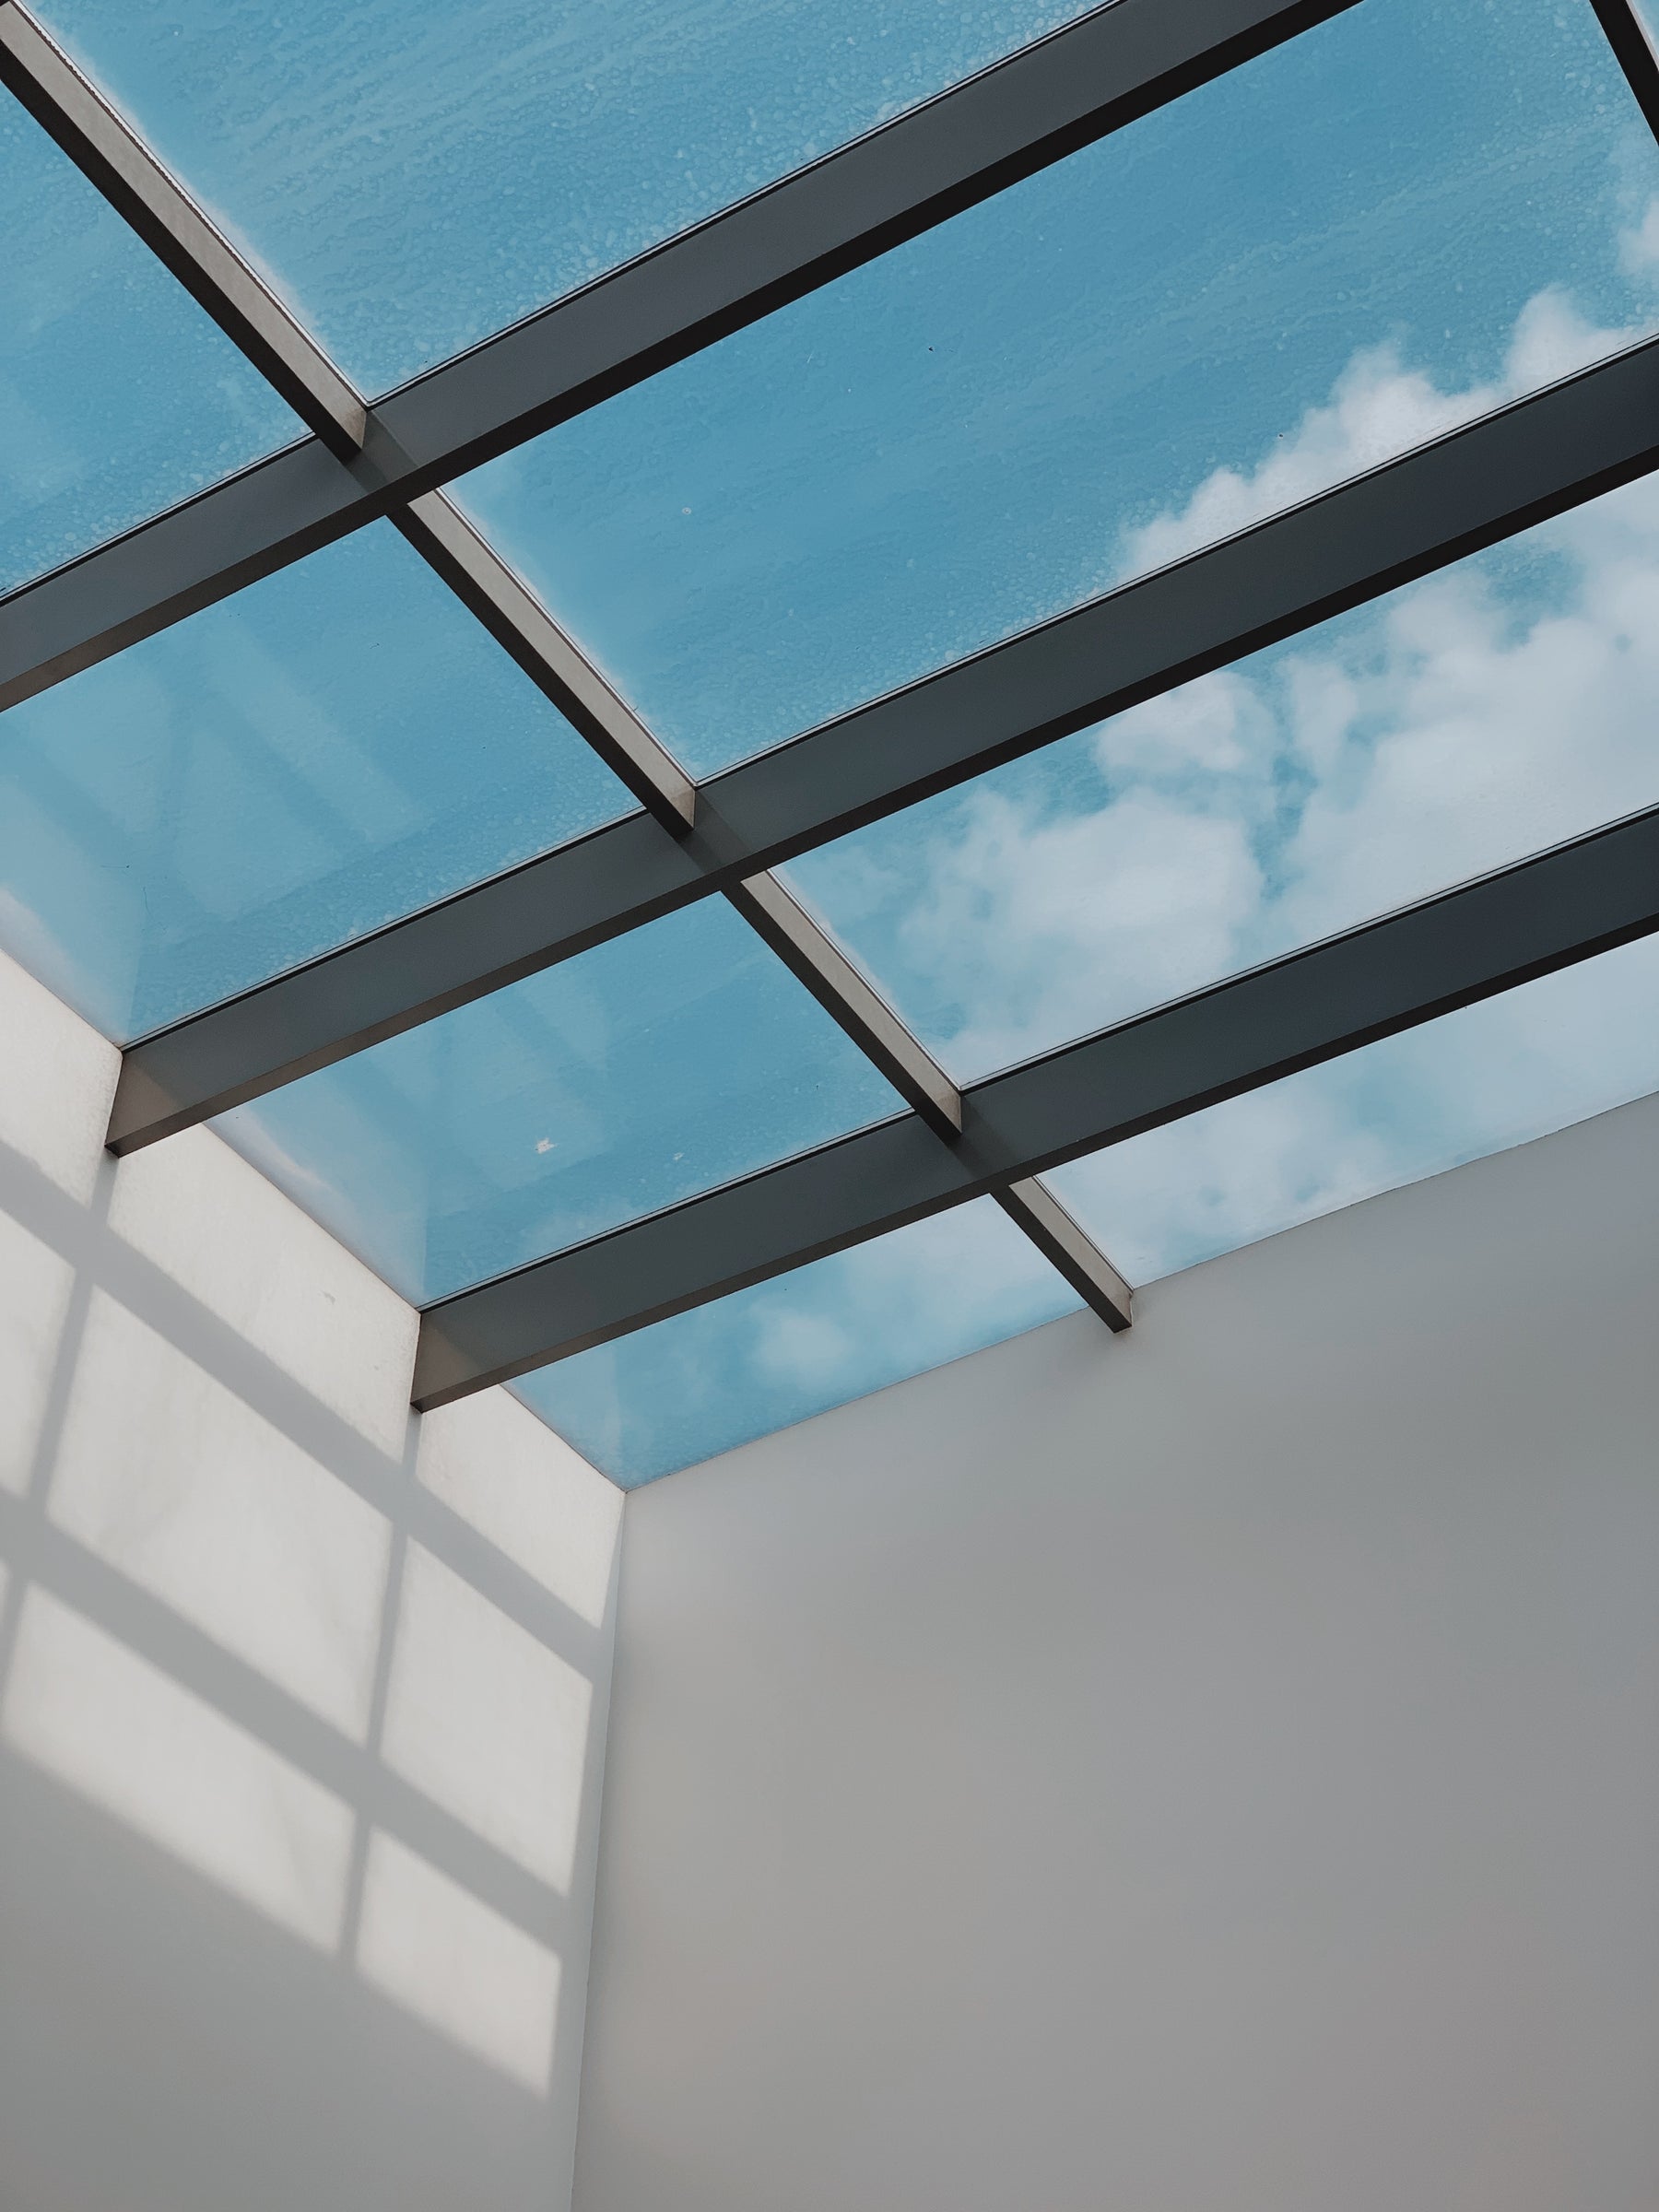 Illuminating Your Home: Where Should You Place a Roof Lantern?